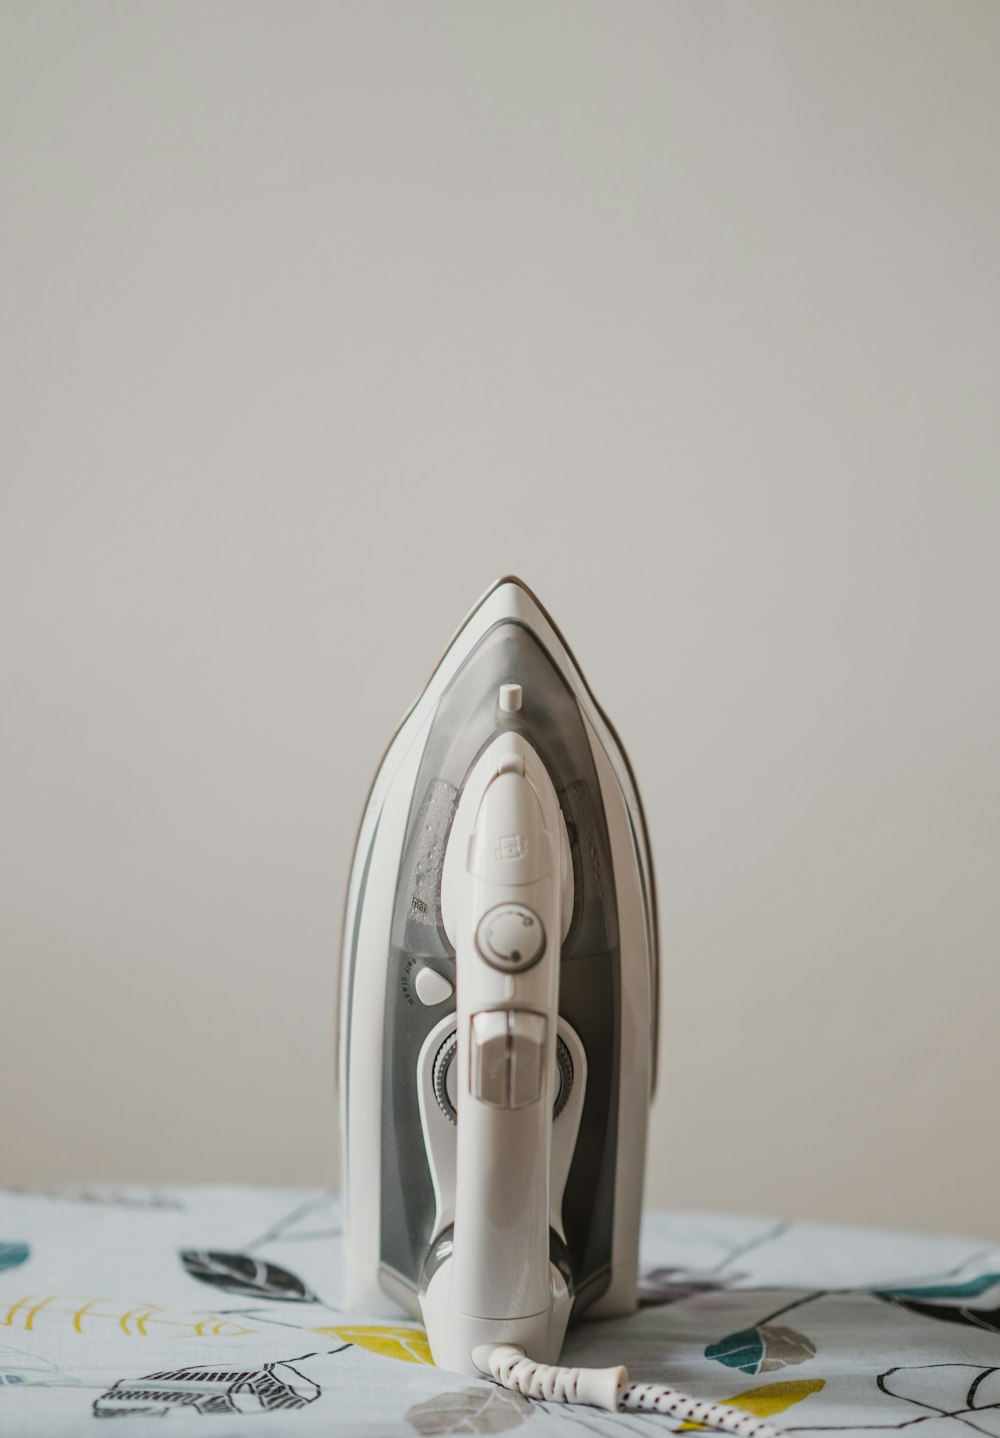 used white and gray steam iron